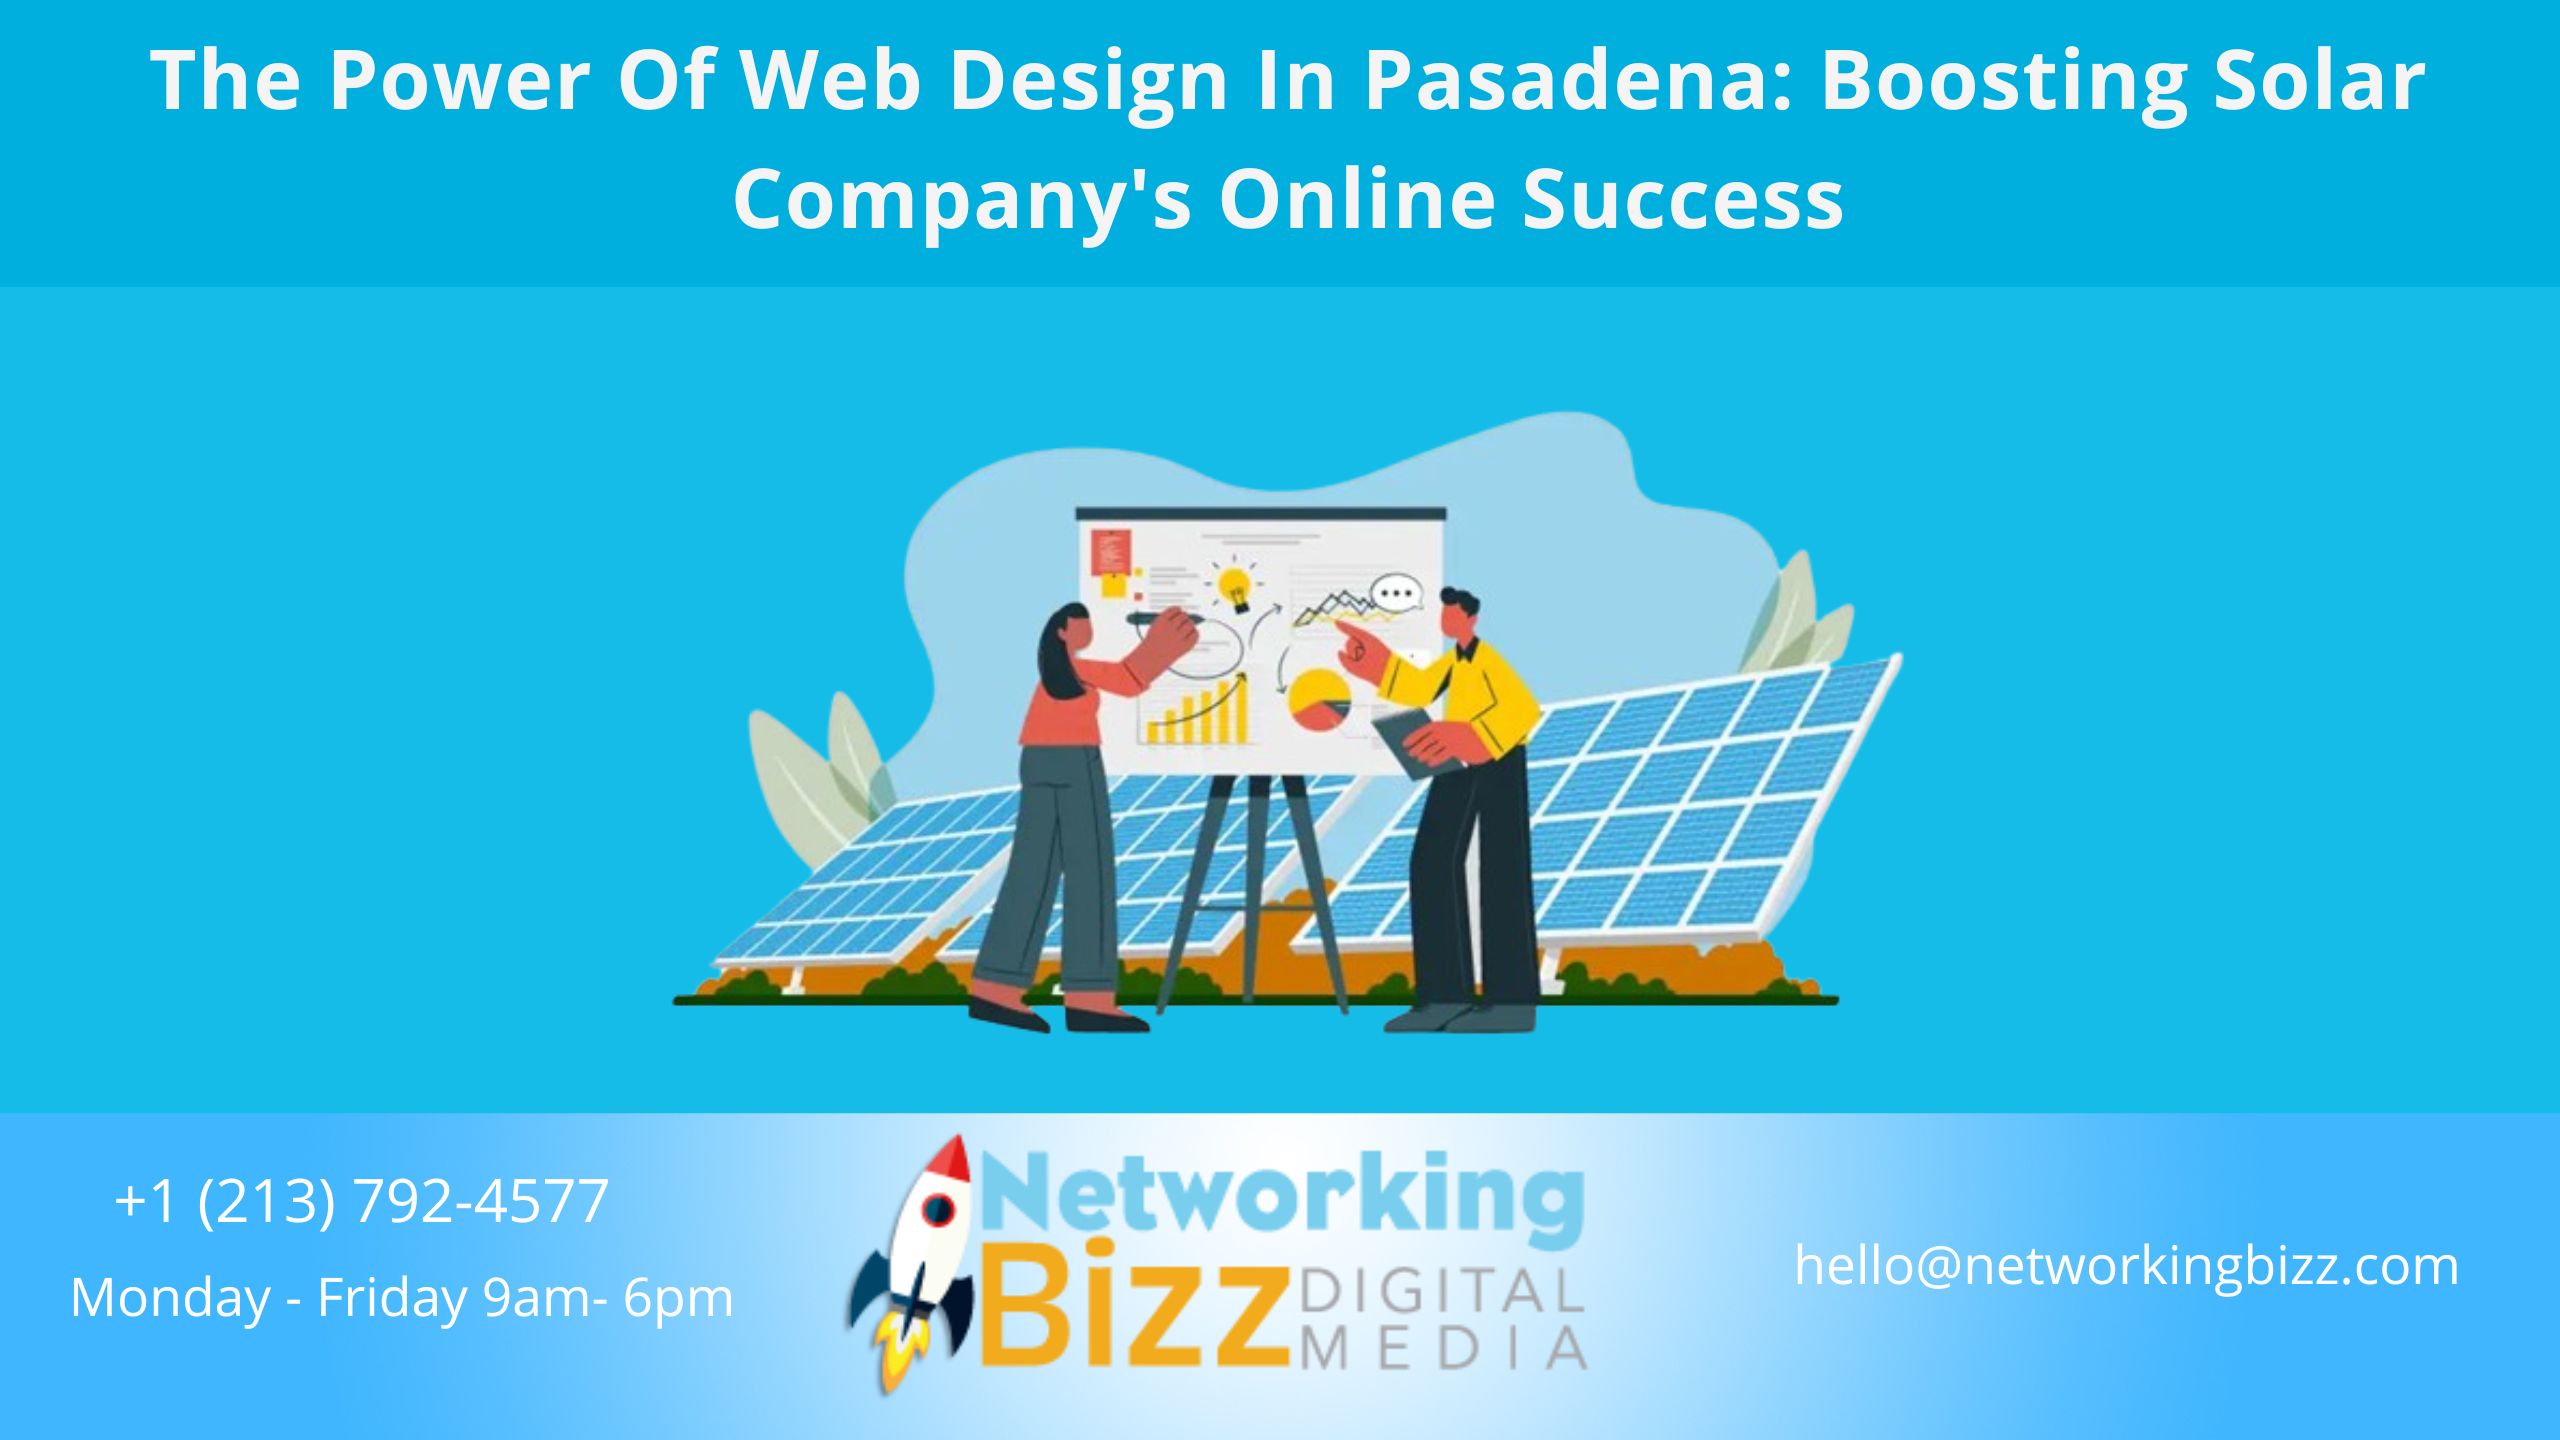 The Power Of Web Design In Pasadena: Boosting Solar Company’s Online Success